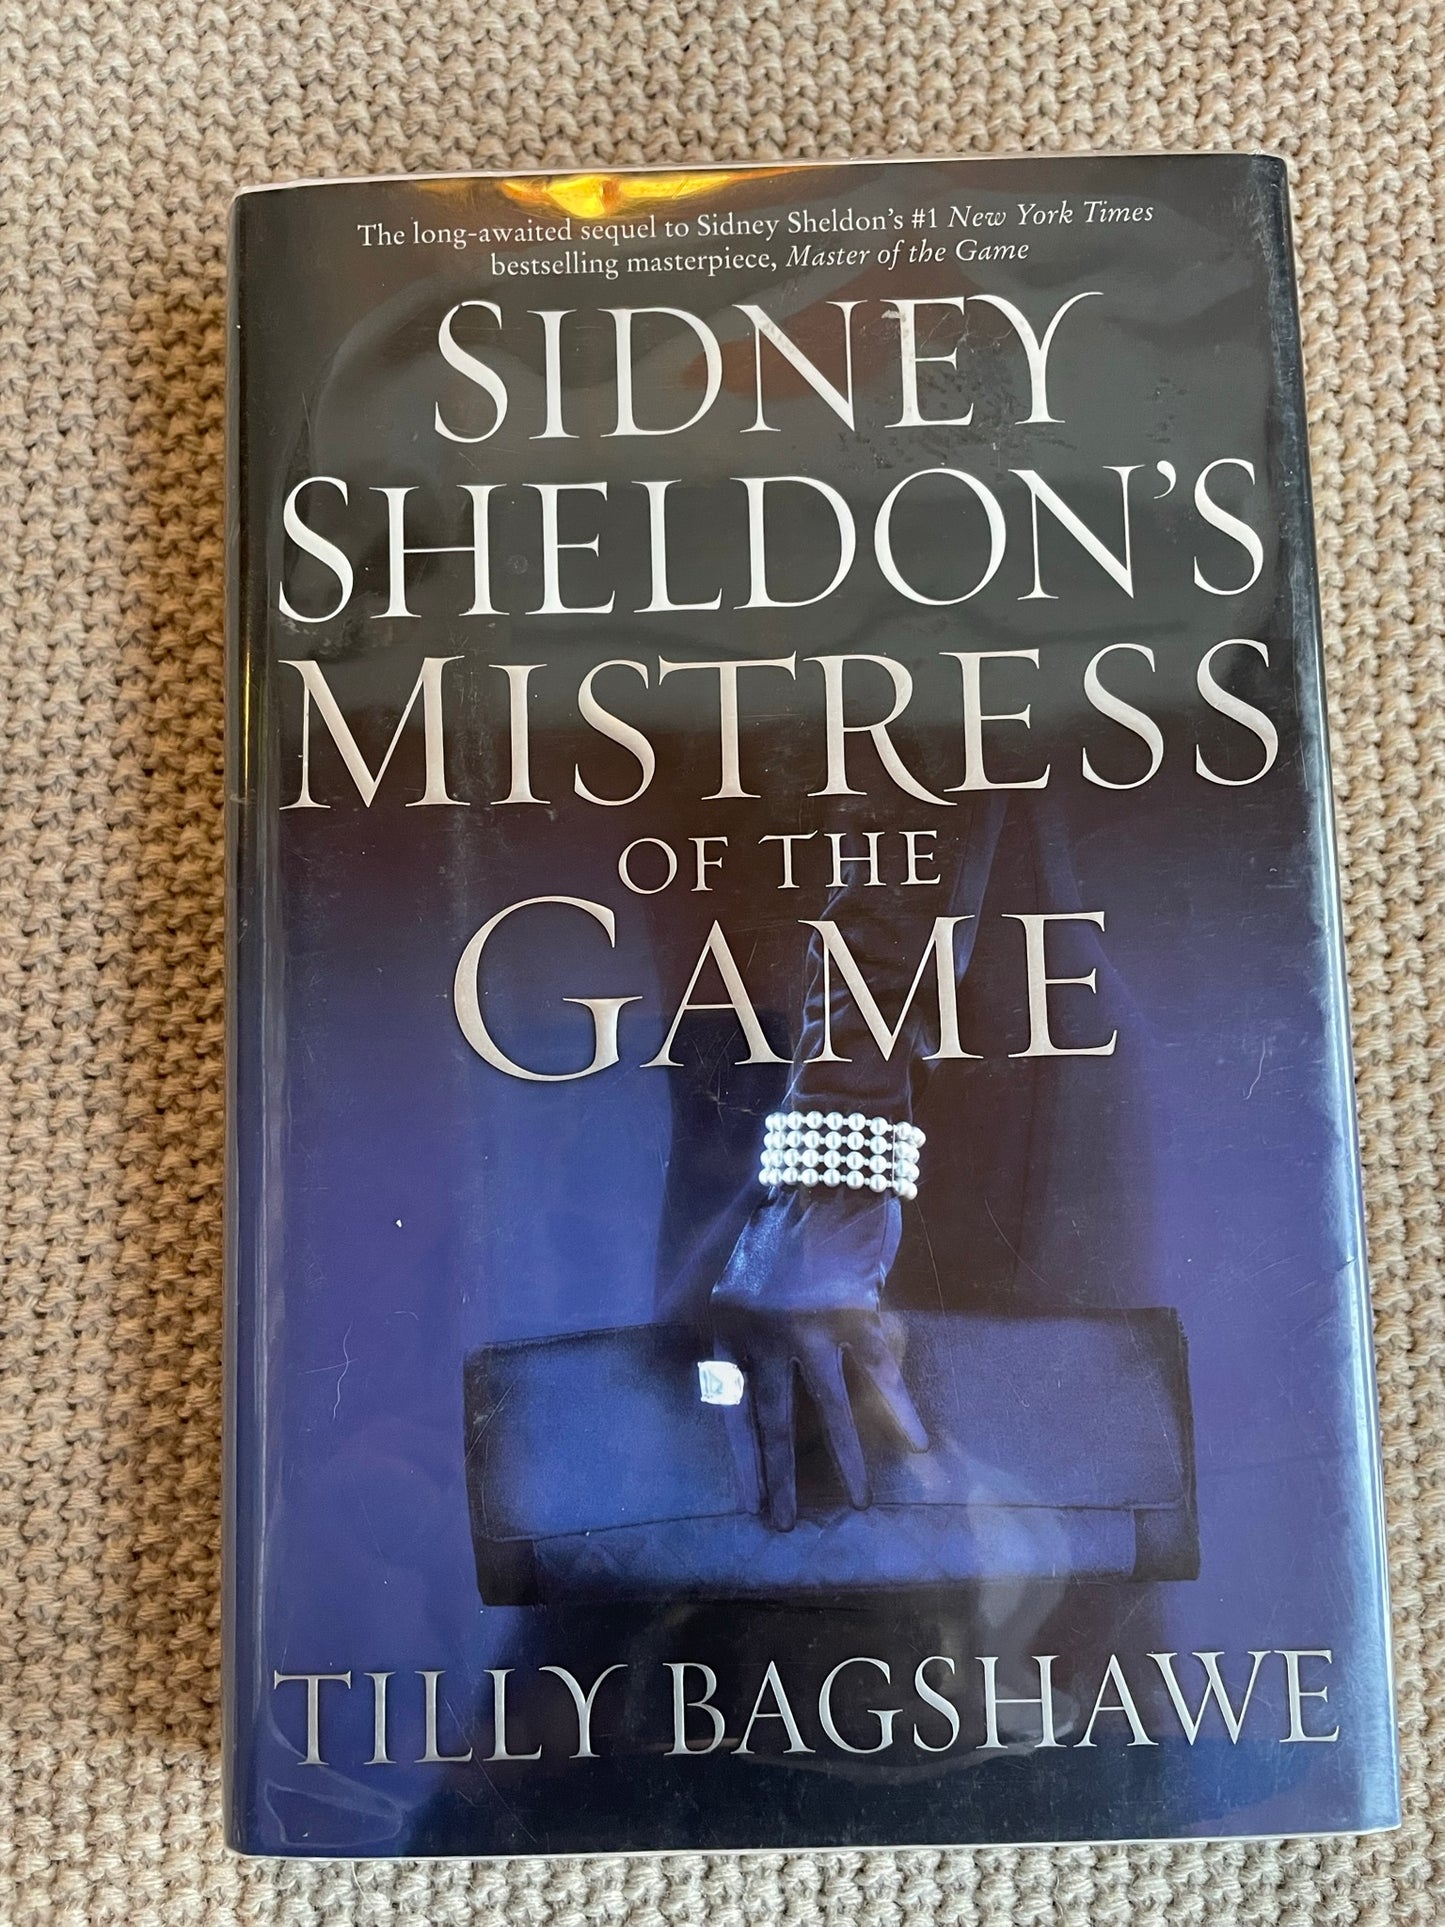 Sheldon, Sidney: Mistress of the Game - Tilly Bagshawe (First Edition, 2009)